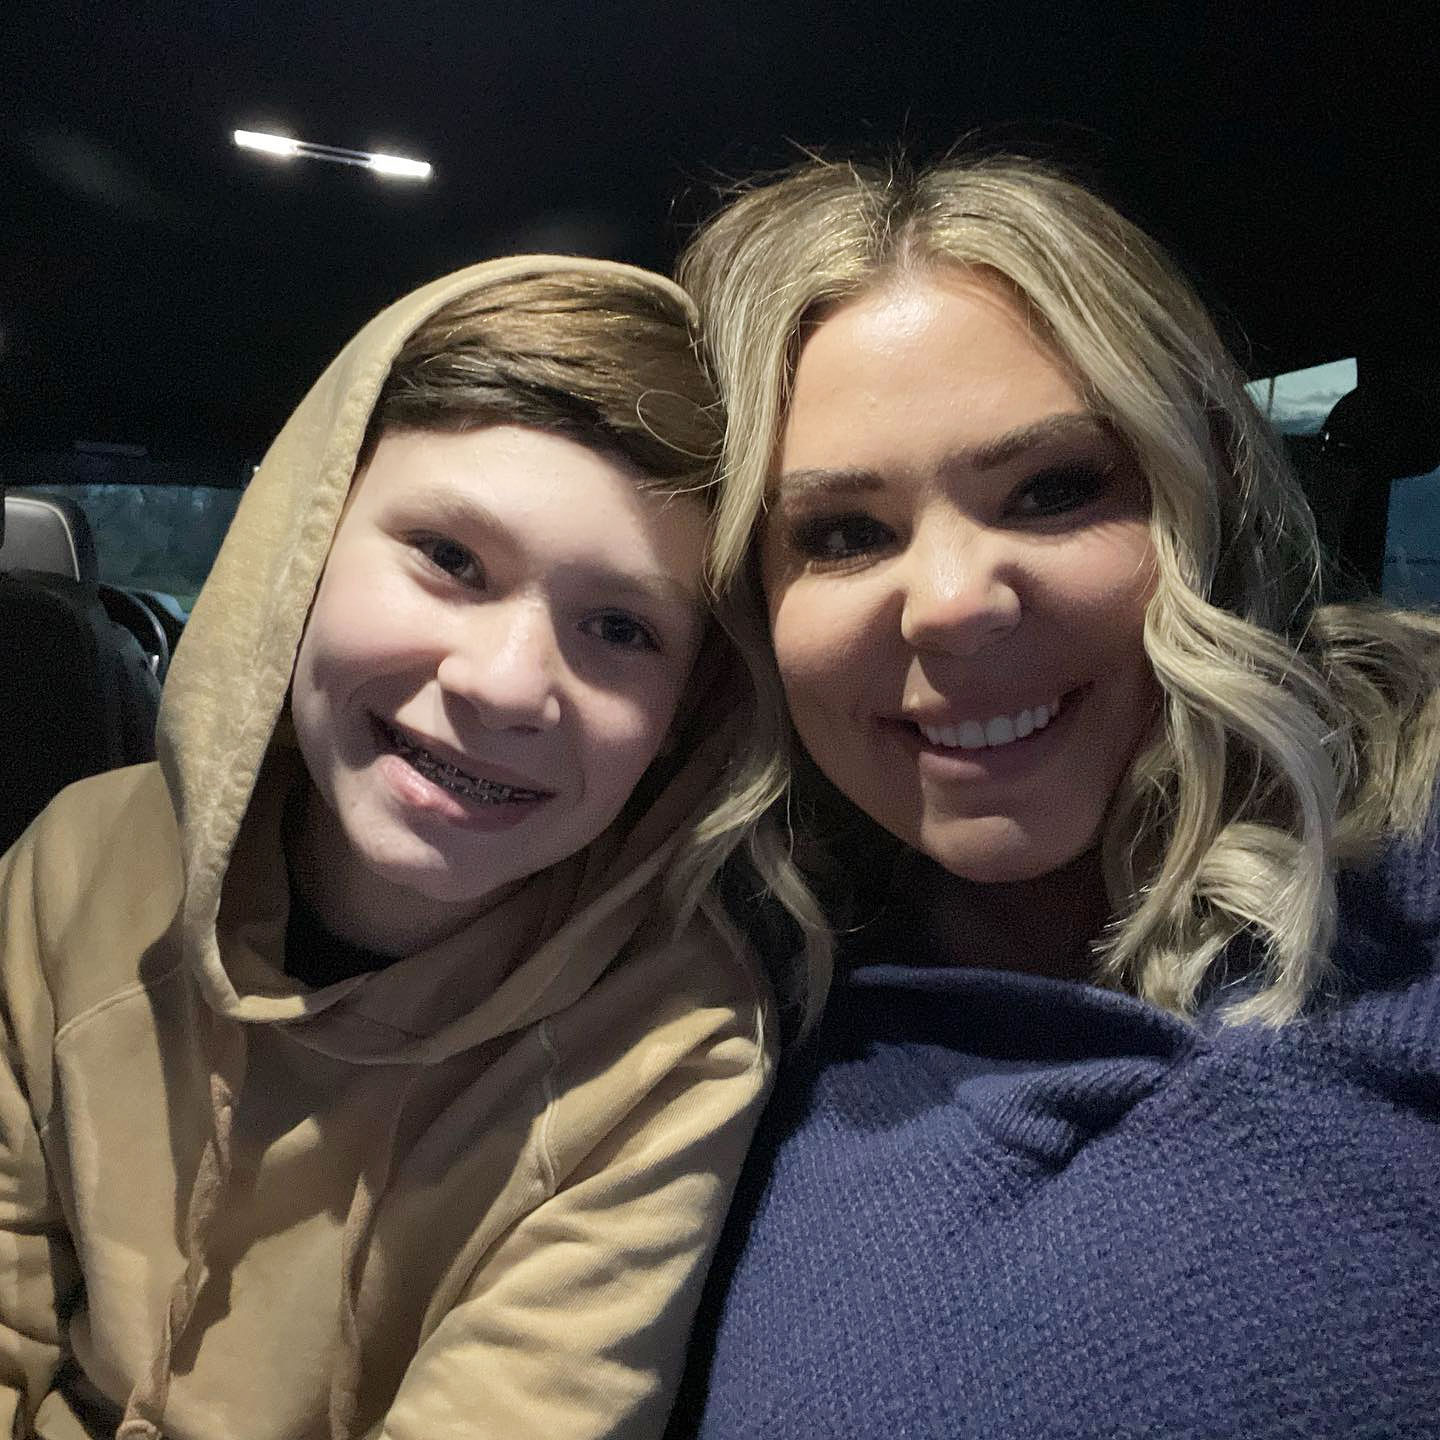 Kailyn Lowrys Son Told Her to Use a Condom to Avoid Pregnancy